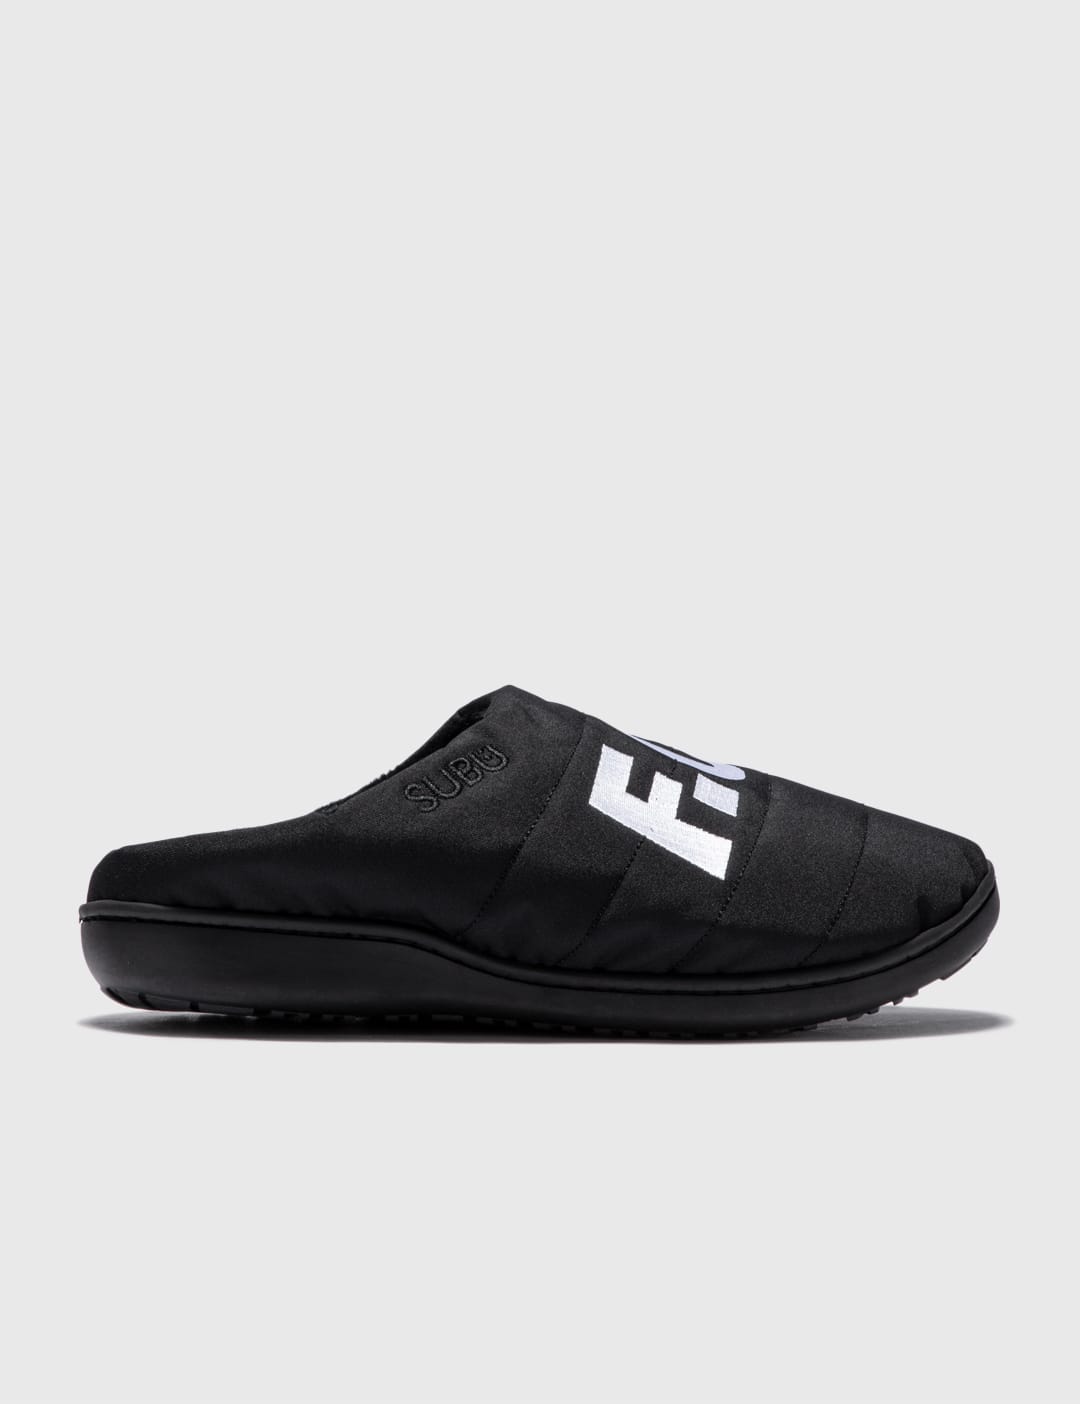 F.C. Real Bristol - Subu FCRB Sandals | HBX - Globally Curated